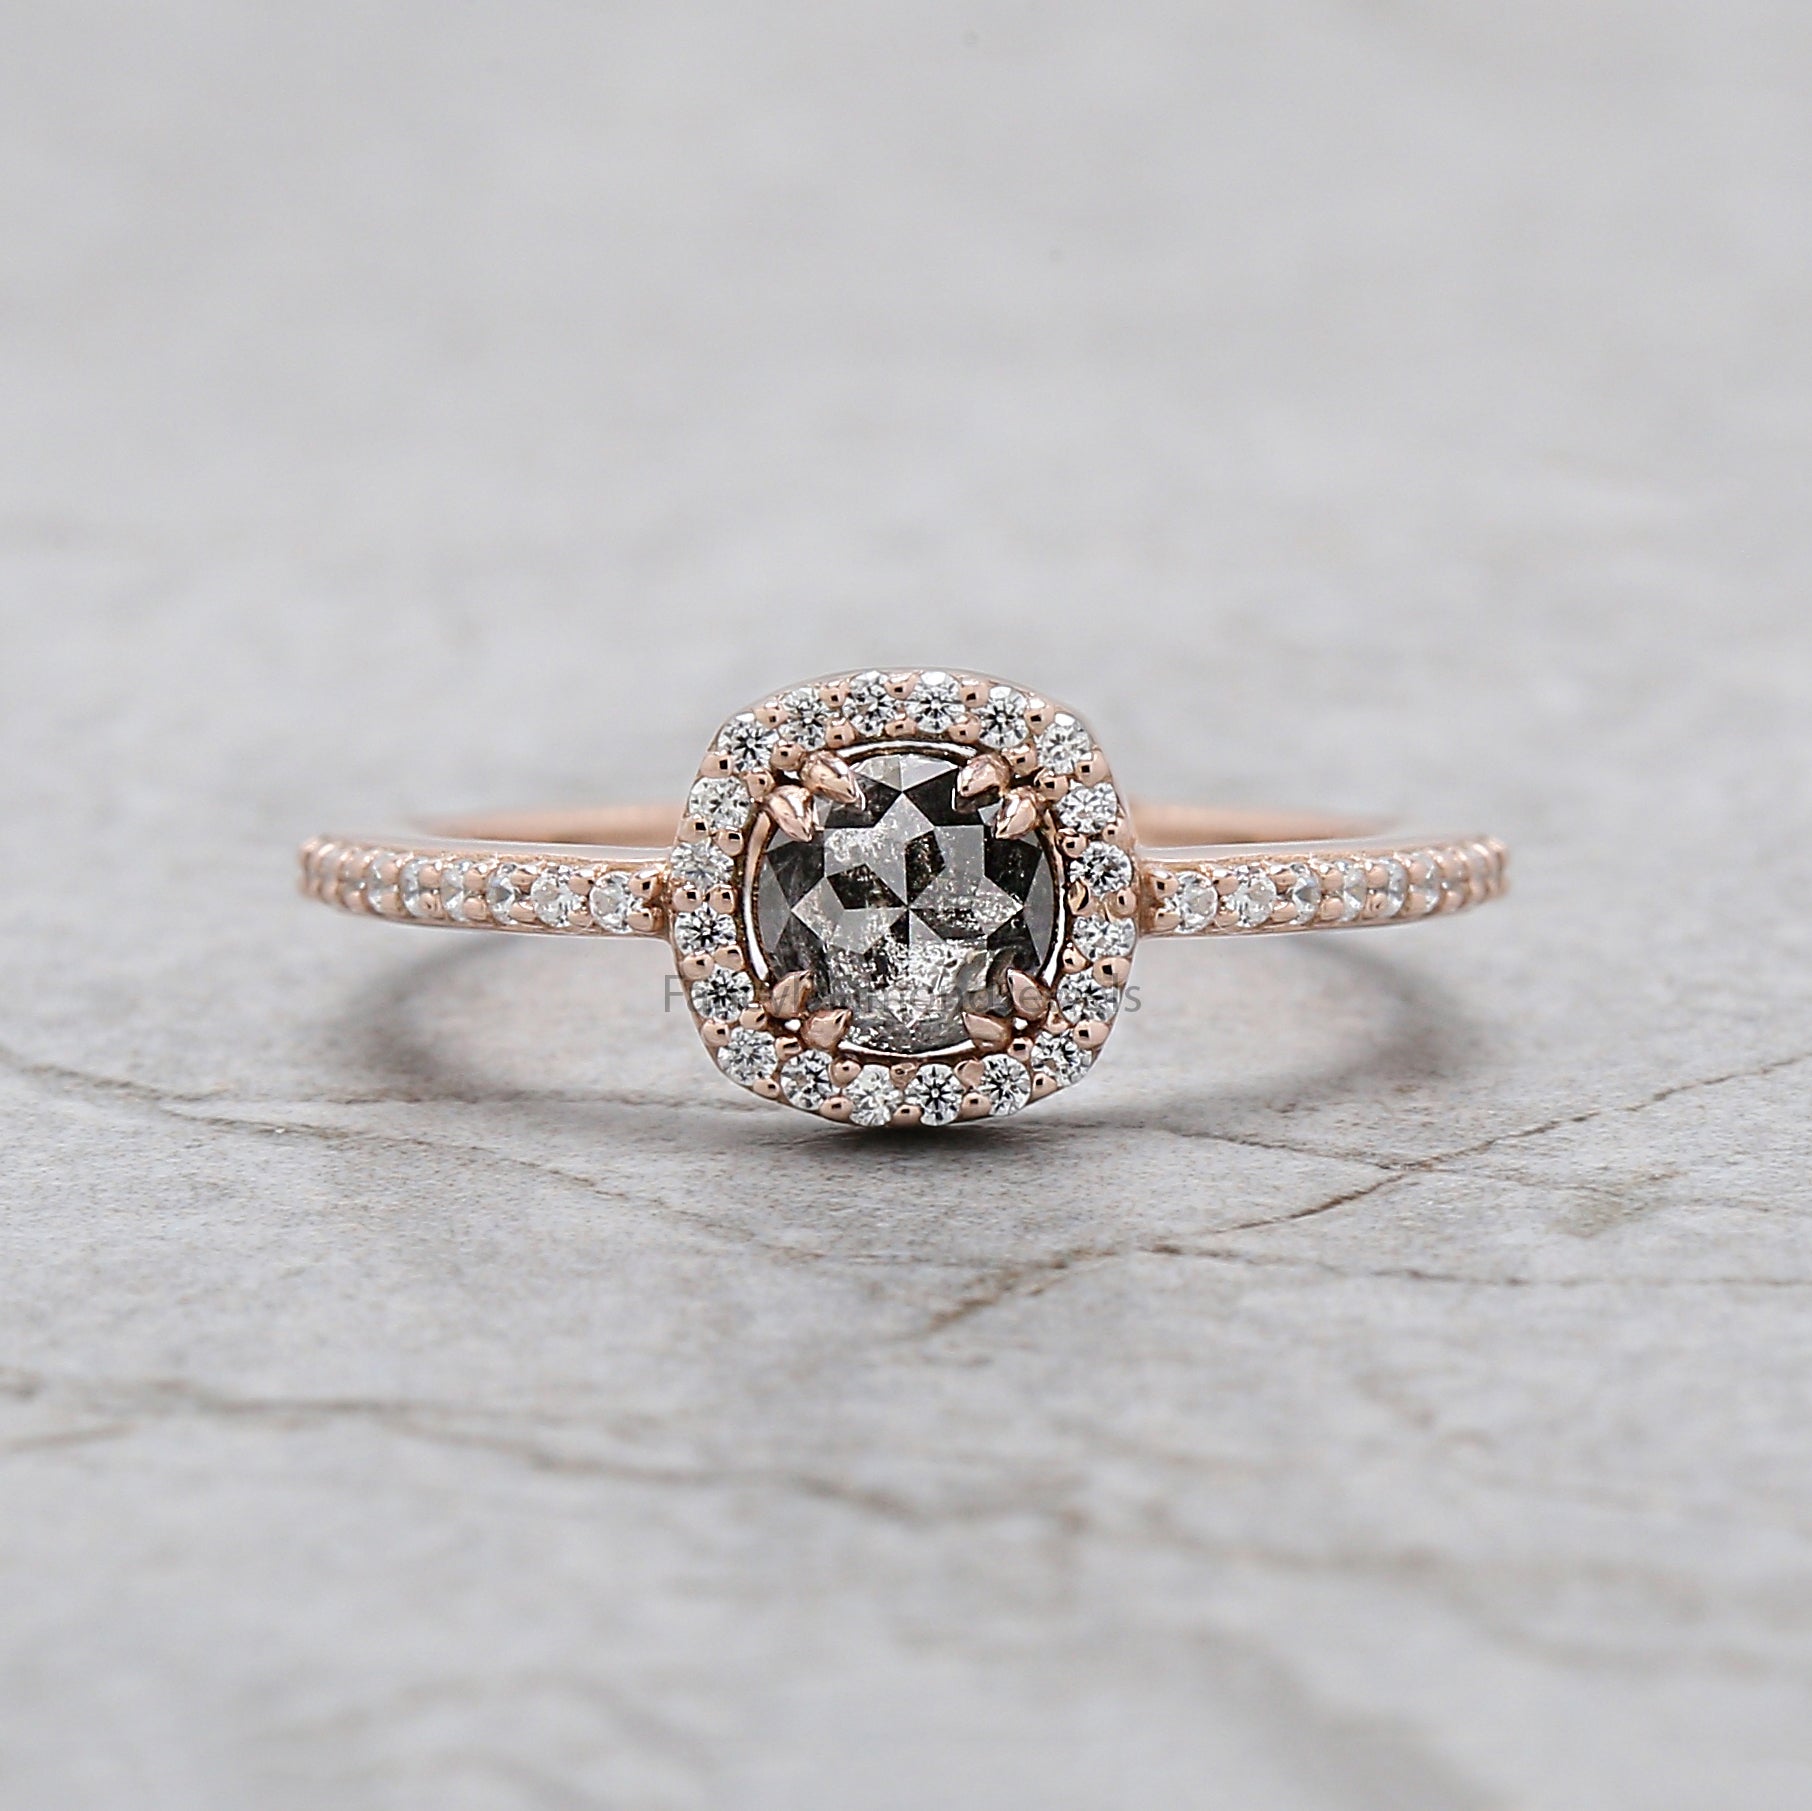 Round Rose Cut Salt And Pepper Diamond Ring 0.51 Ct 4.83 MM Round Diamond Ring 14K Rose Gold Silver Engagement Ring Gift For Her QL2778